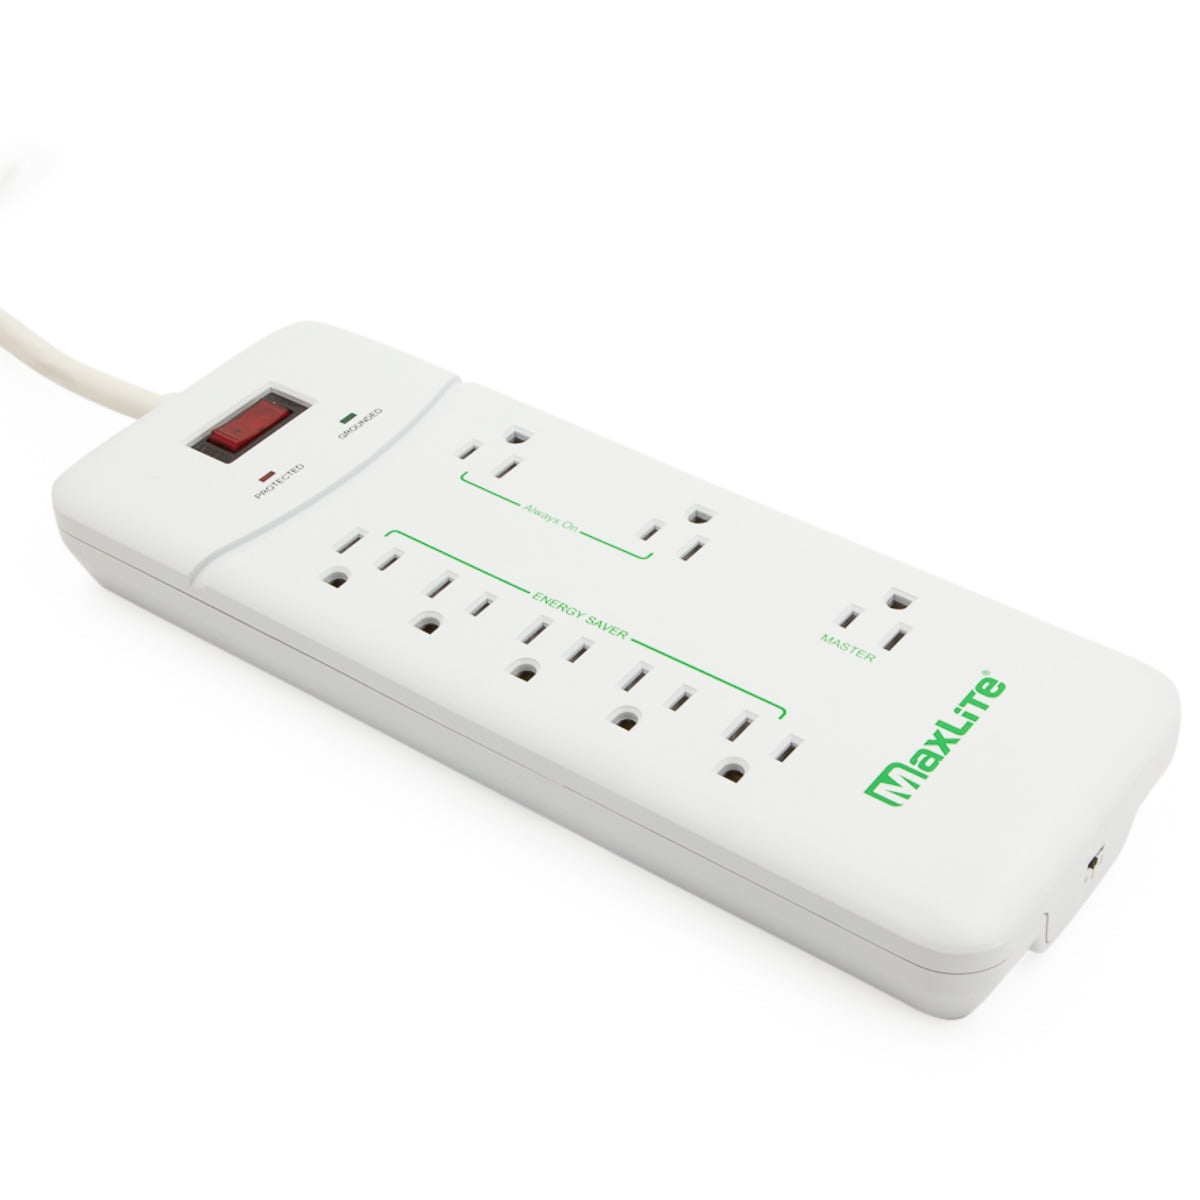 MaxLite 8 Outlet Energy Saving Power Strip Surge Protector with Heavy Duty Cord 